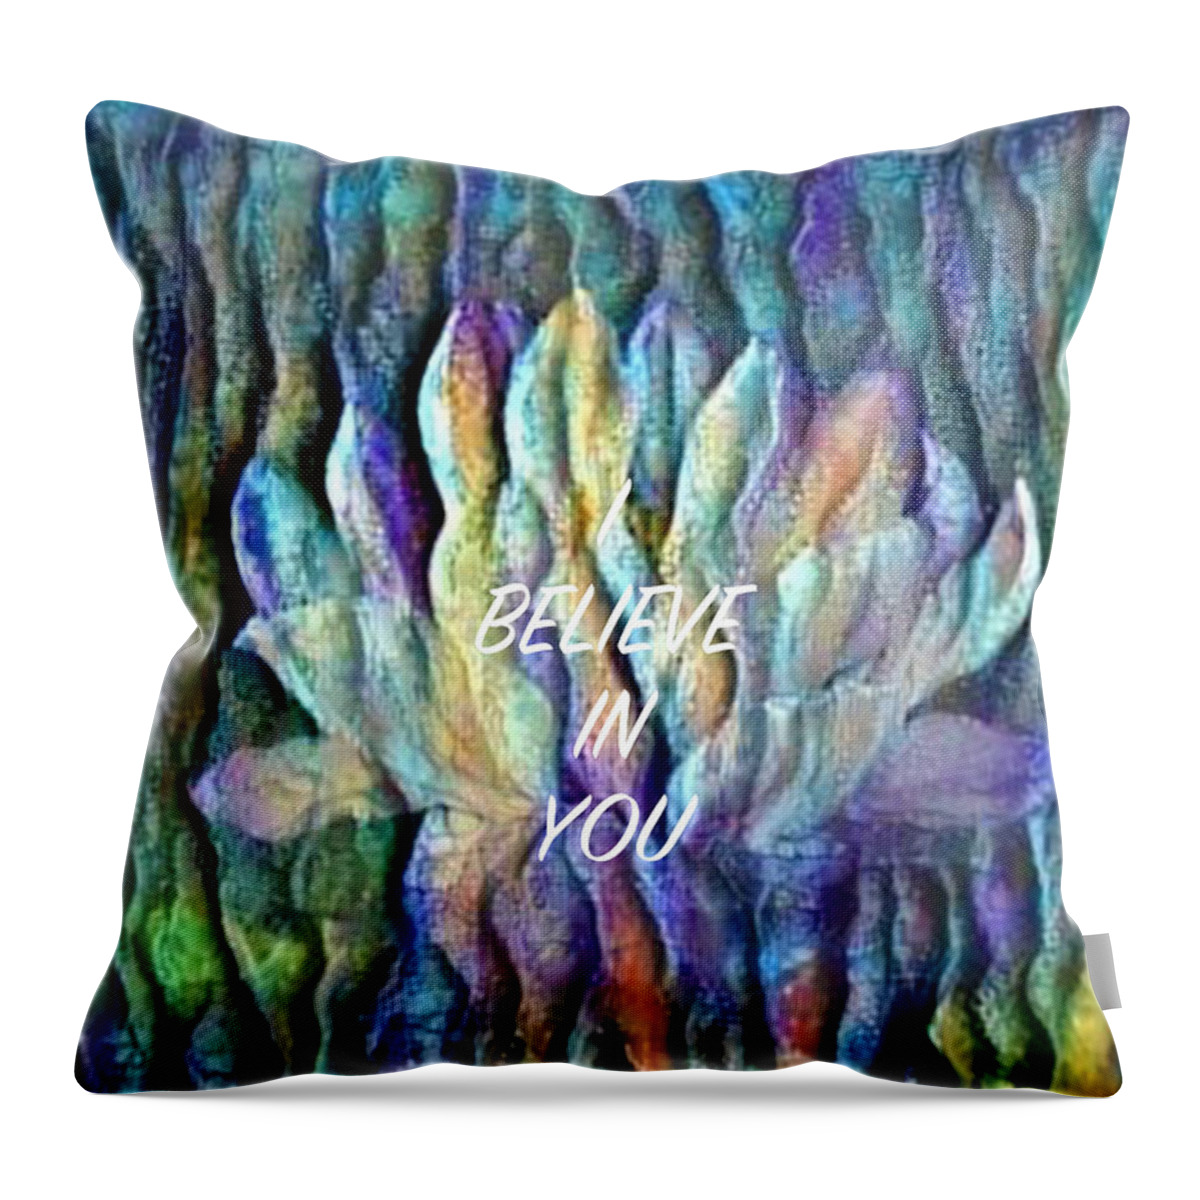 Floating Lotus Throw Pillow featuring the digital art Floating Lotus - I Believe In You by Artistic Mystic